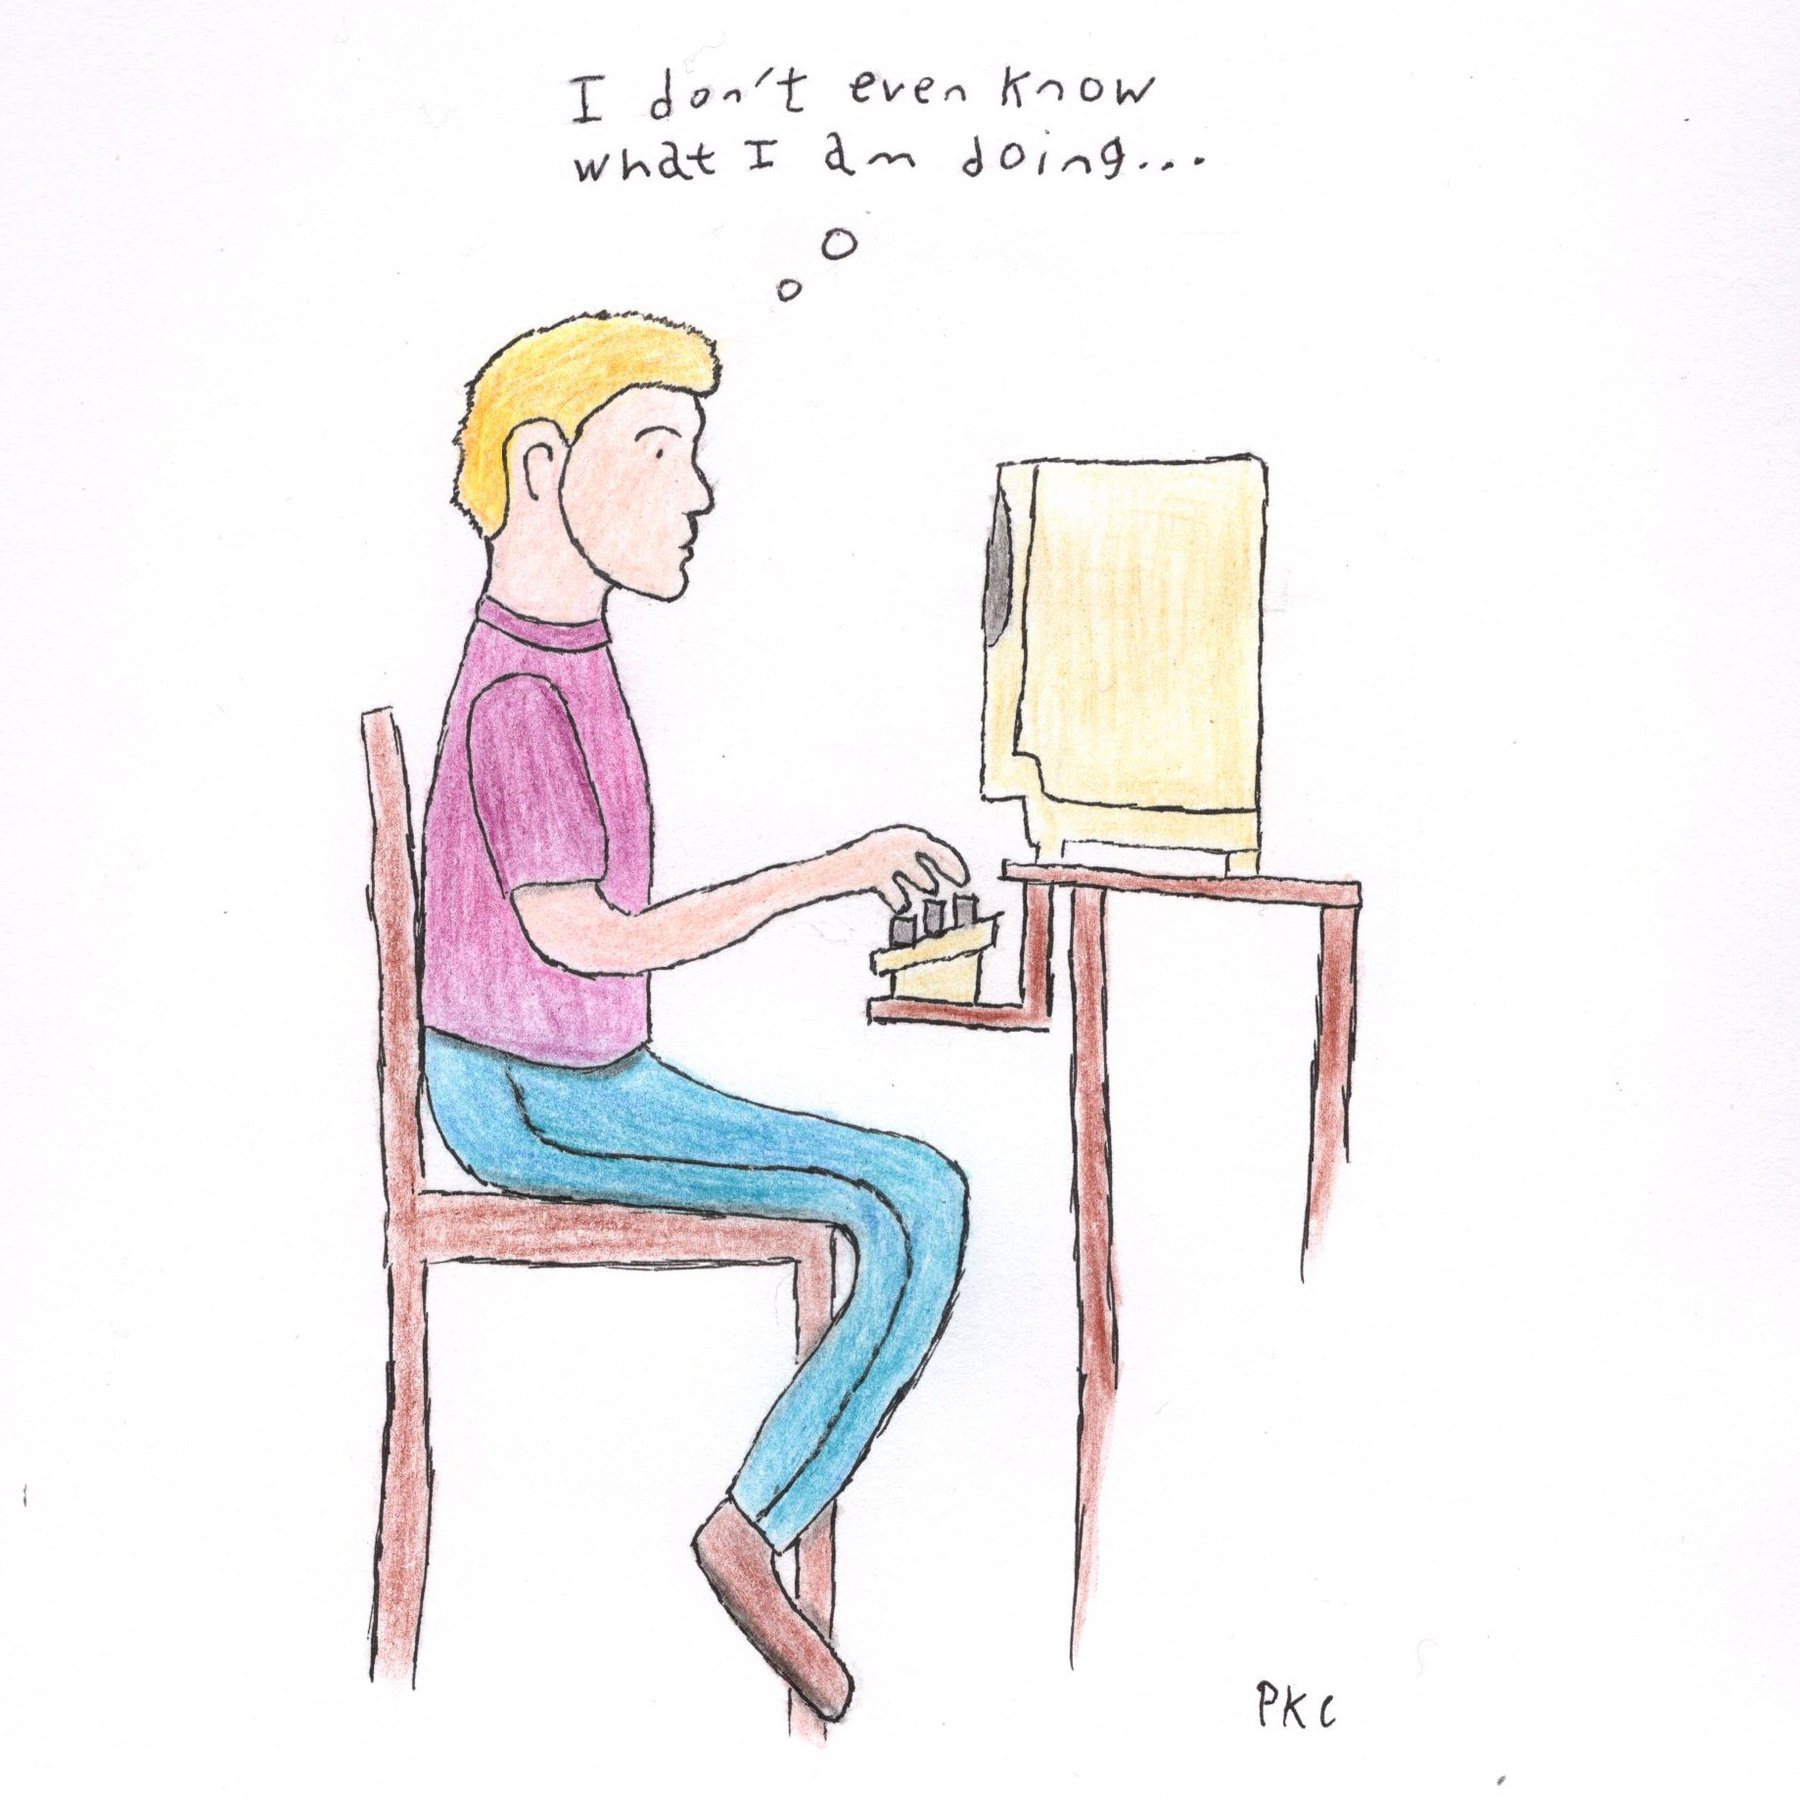 blond man sitting at computer: I don't even know what I am doing